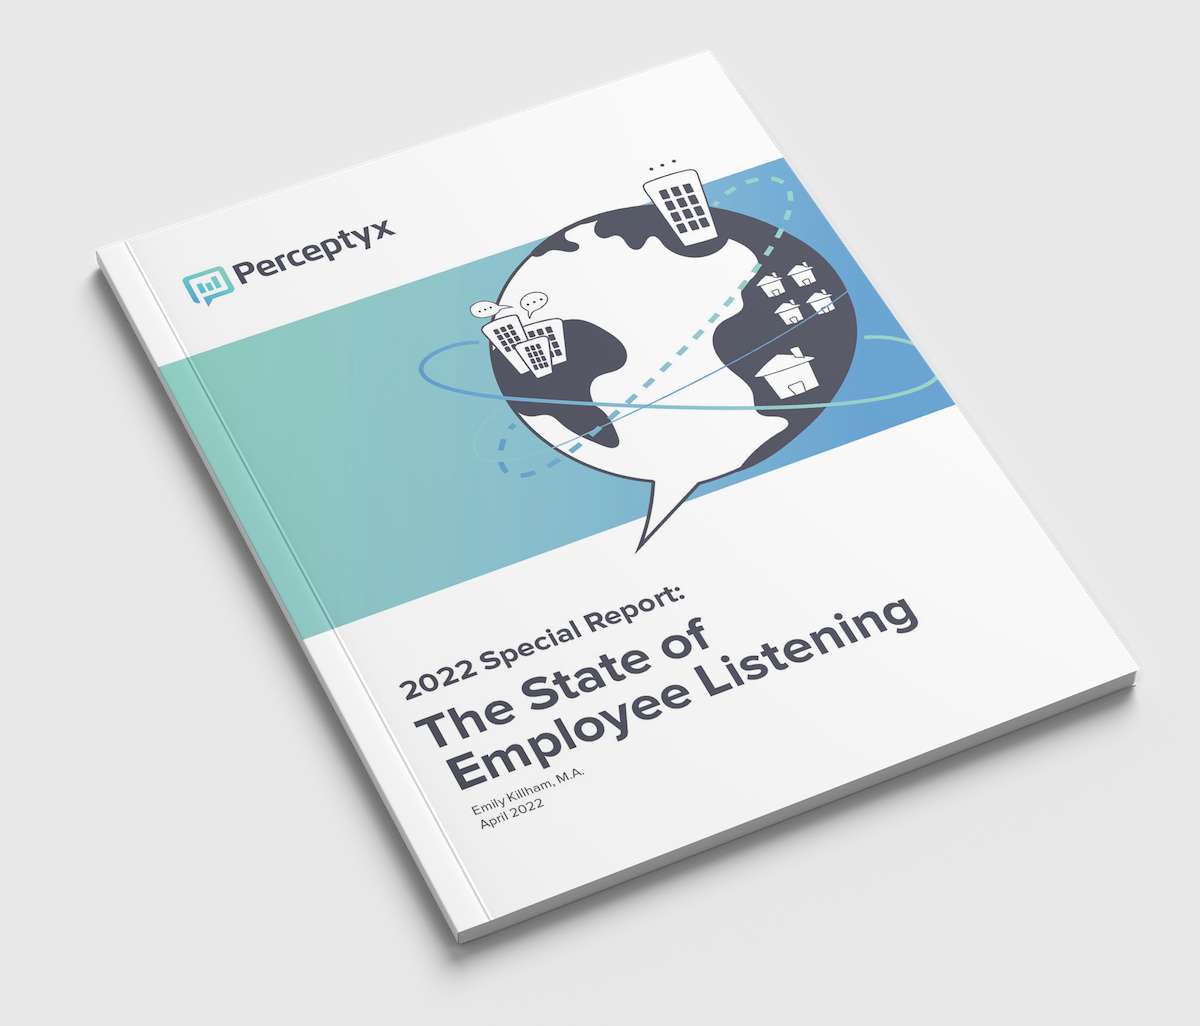 Report-The-State-of-employee-listening-Cover-transparent-BG-02 copy